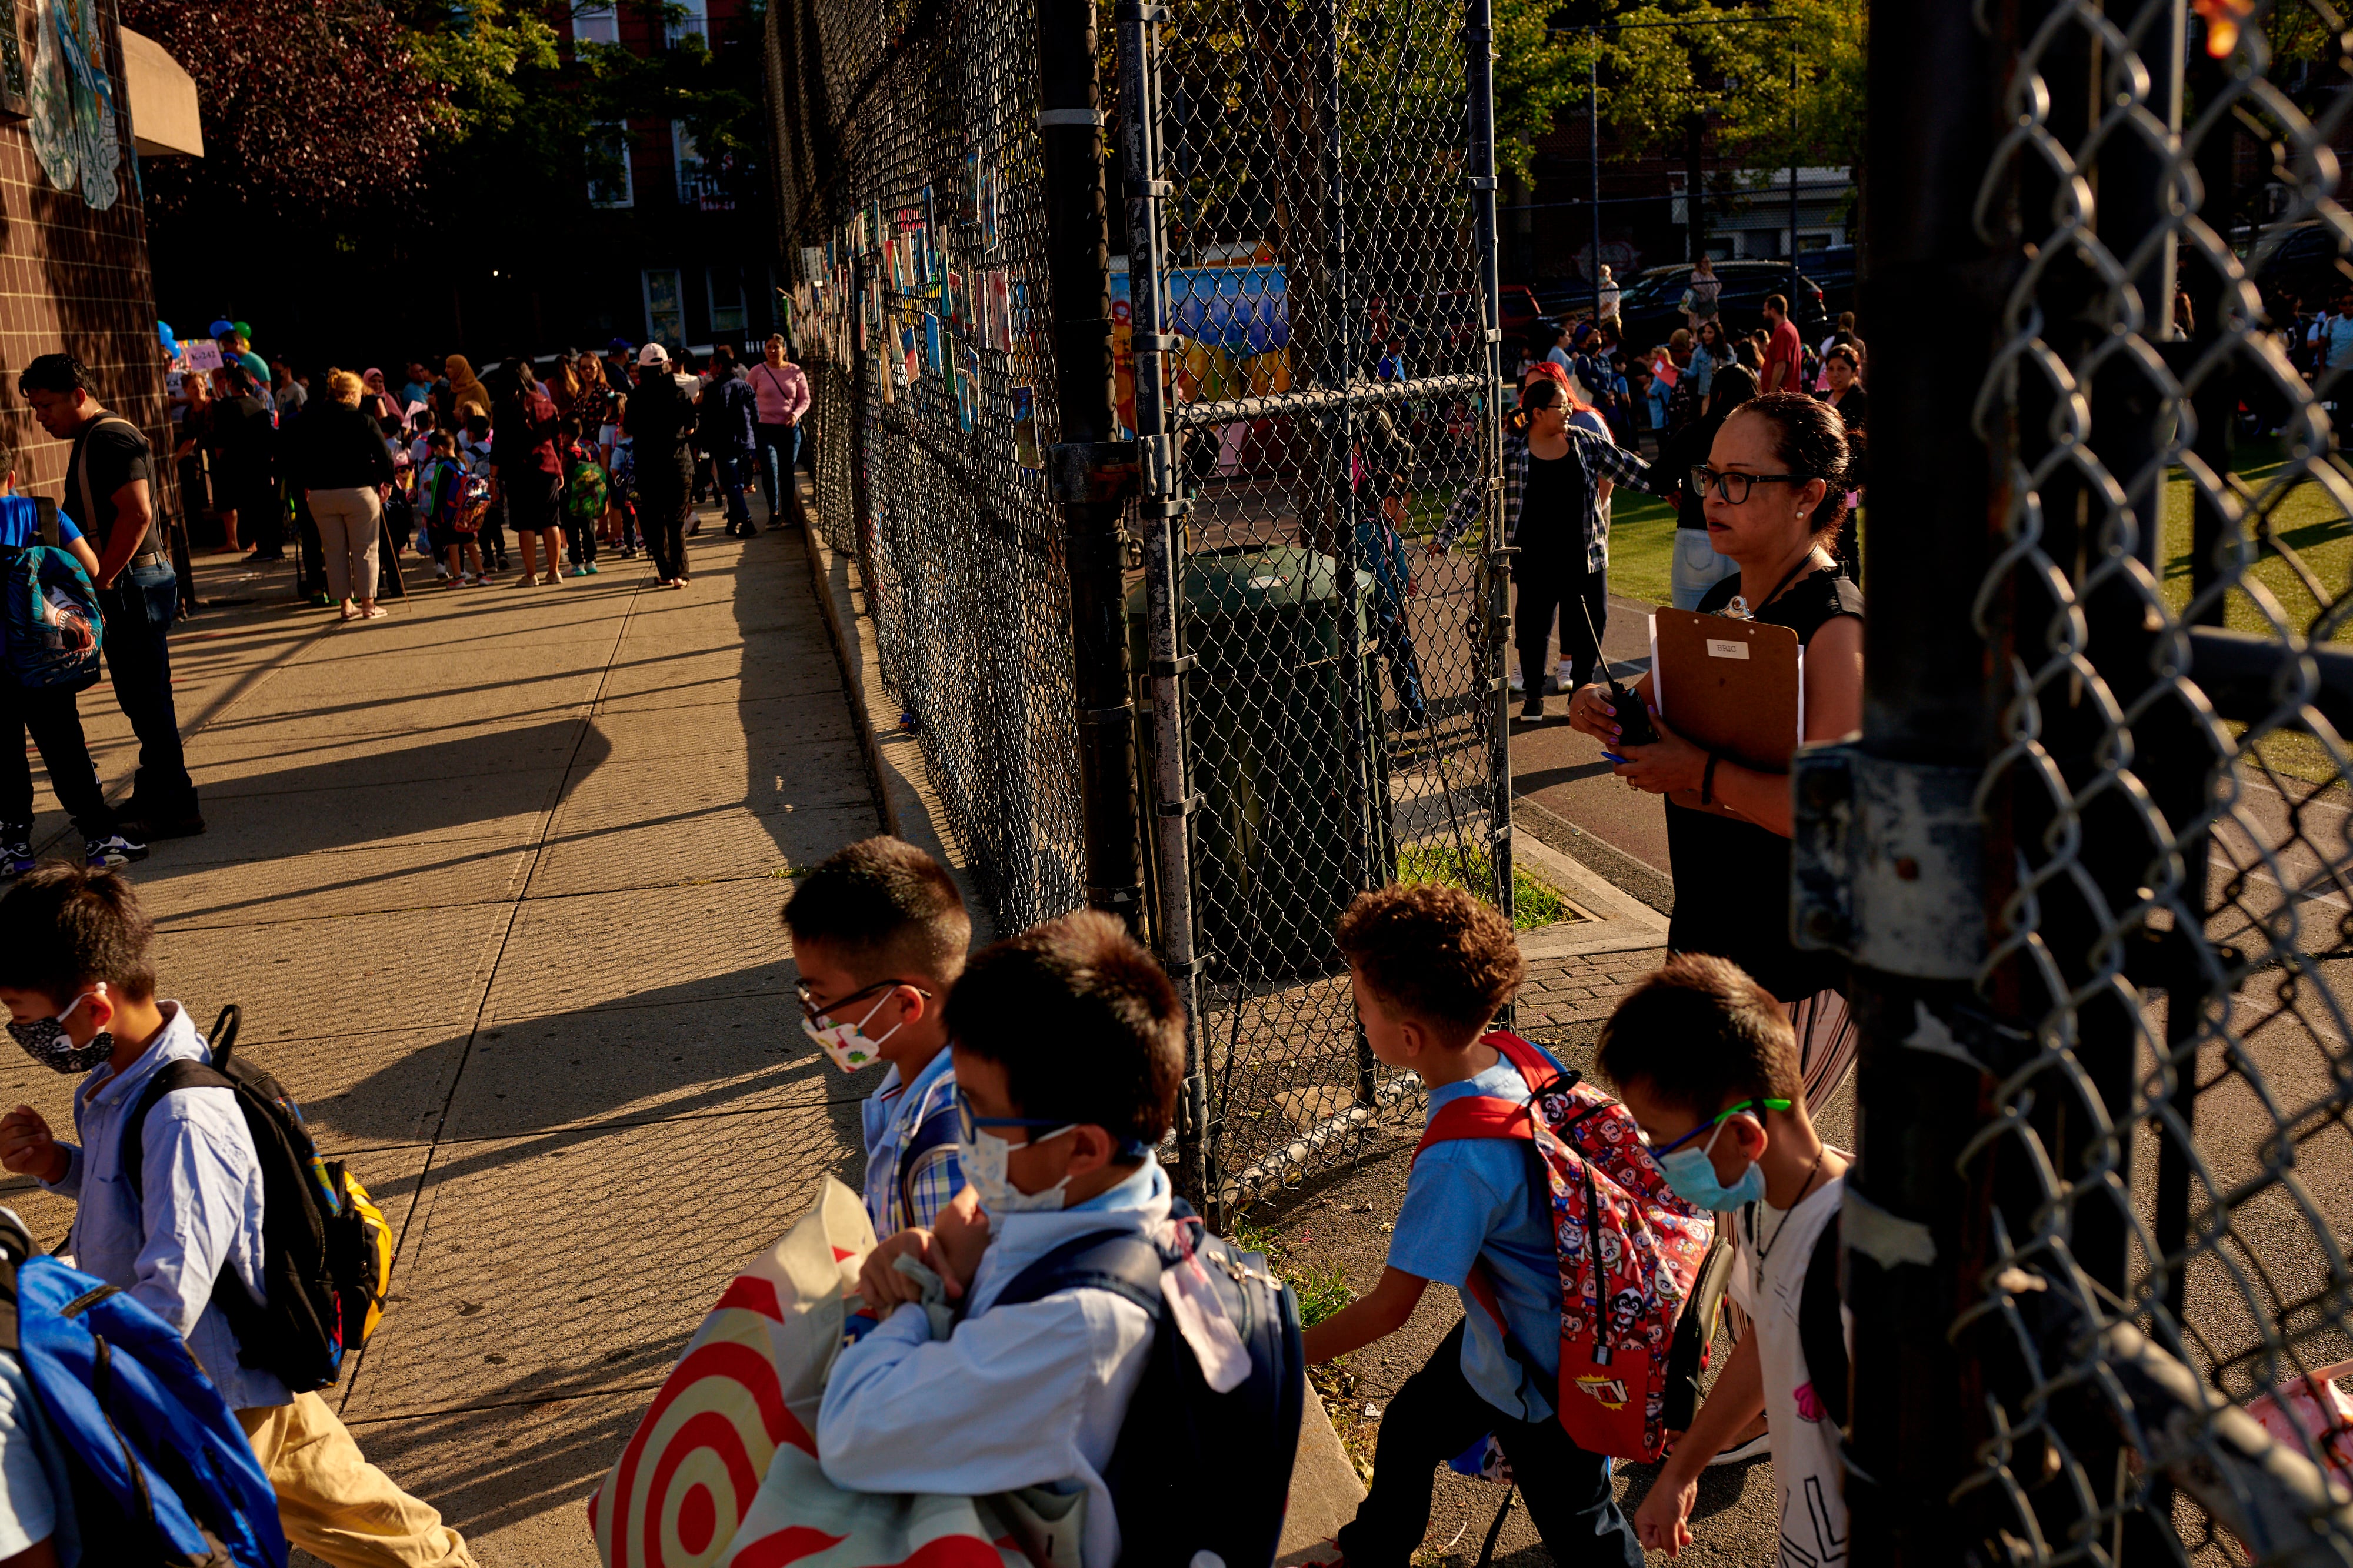 A woman in a black dress stands at a chain link fence around a school buildings as children, some masked, stream onto the sidewalk.